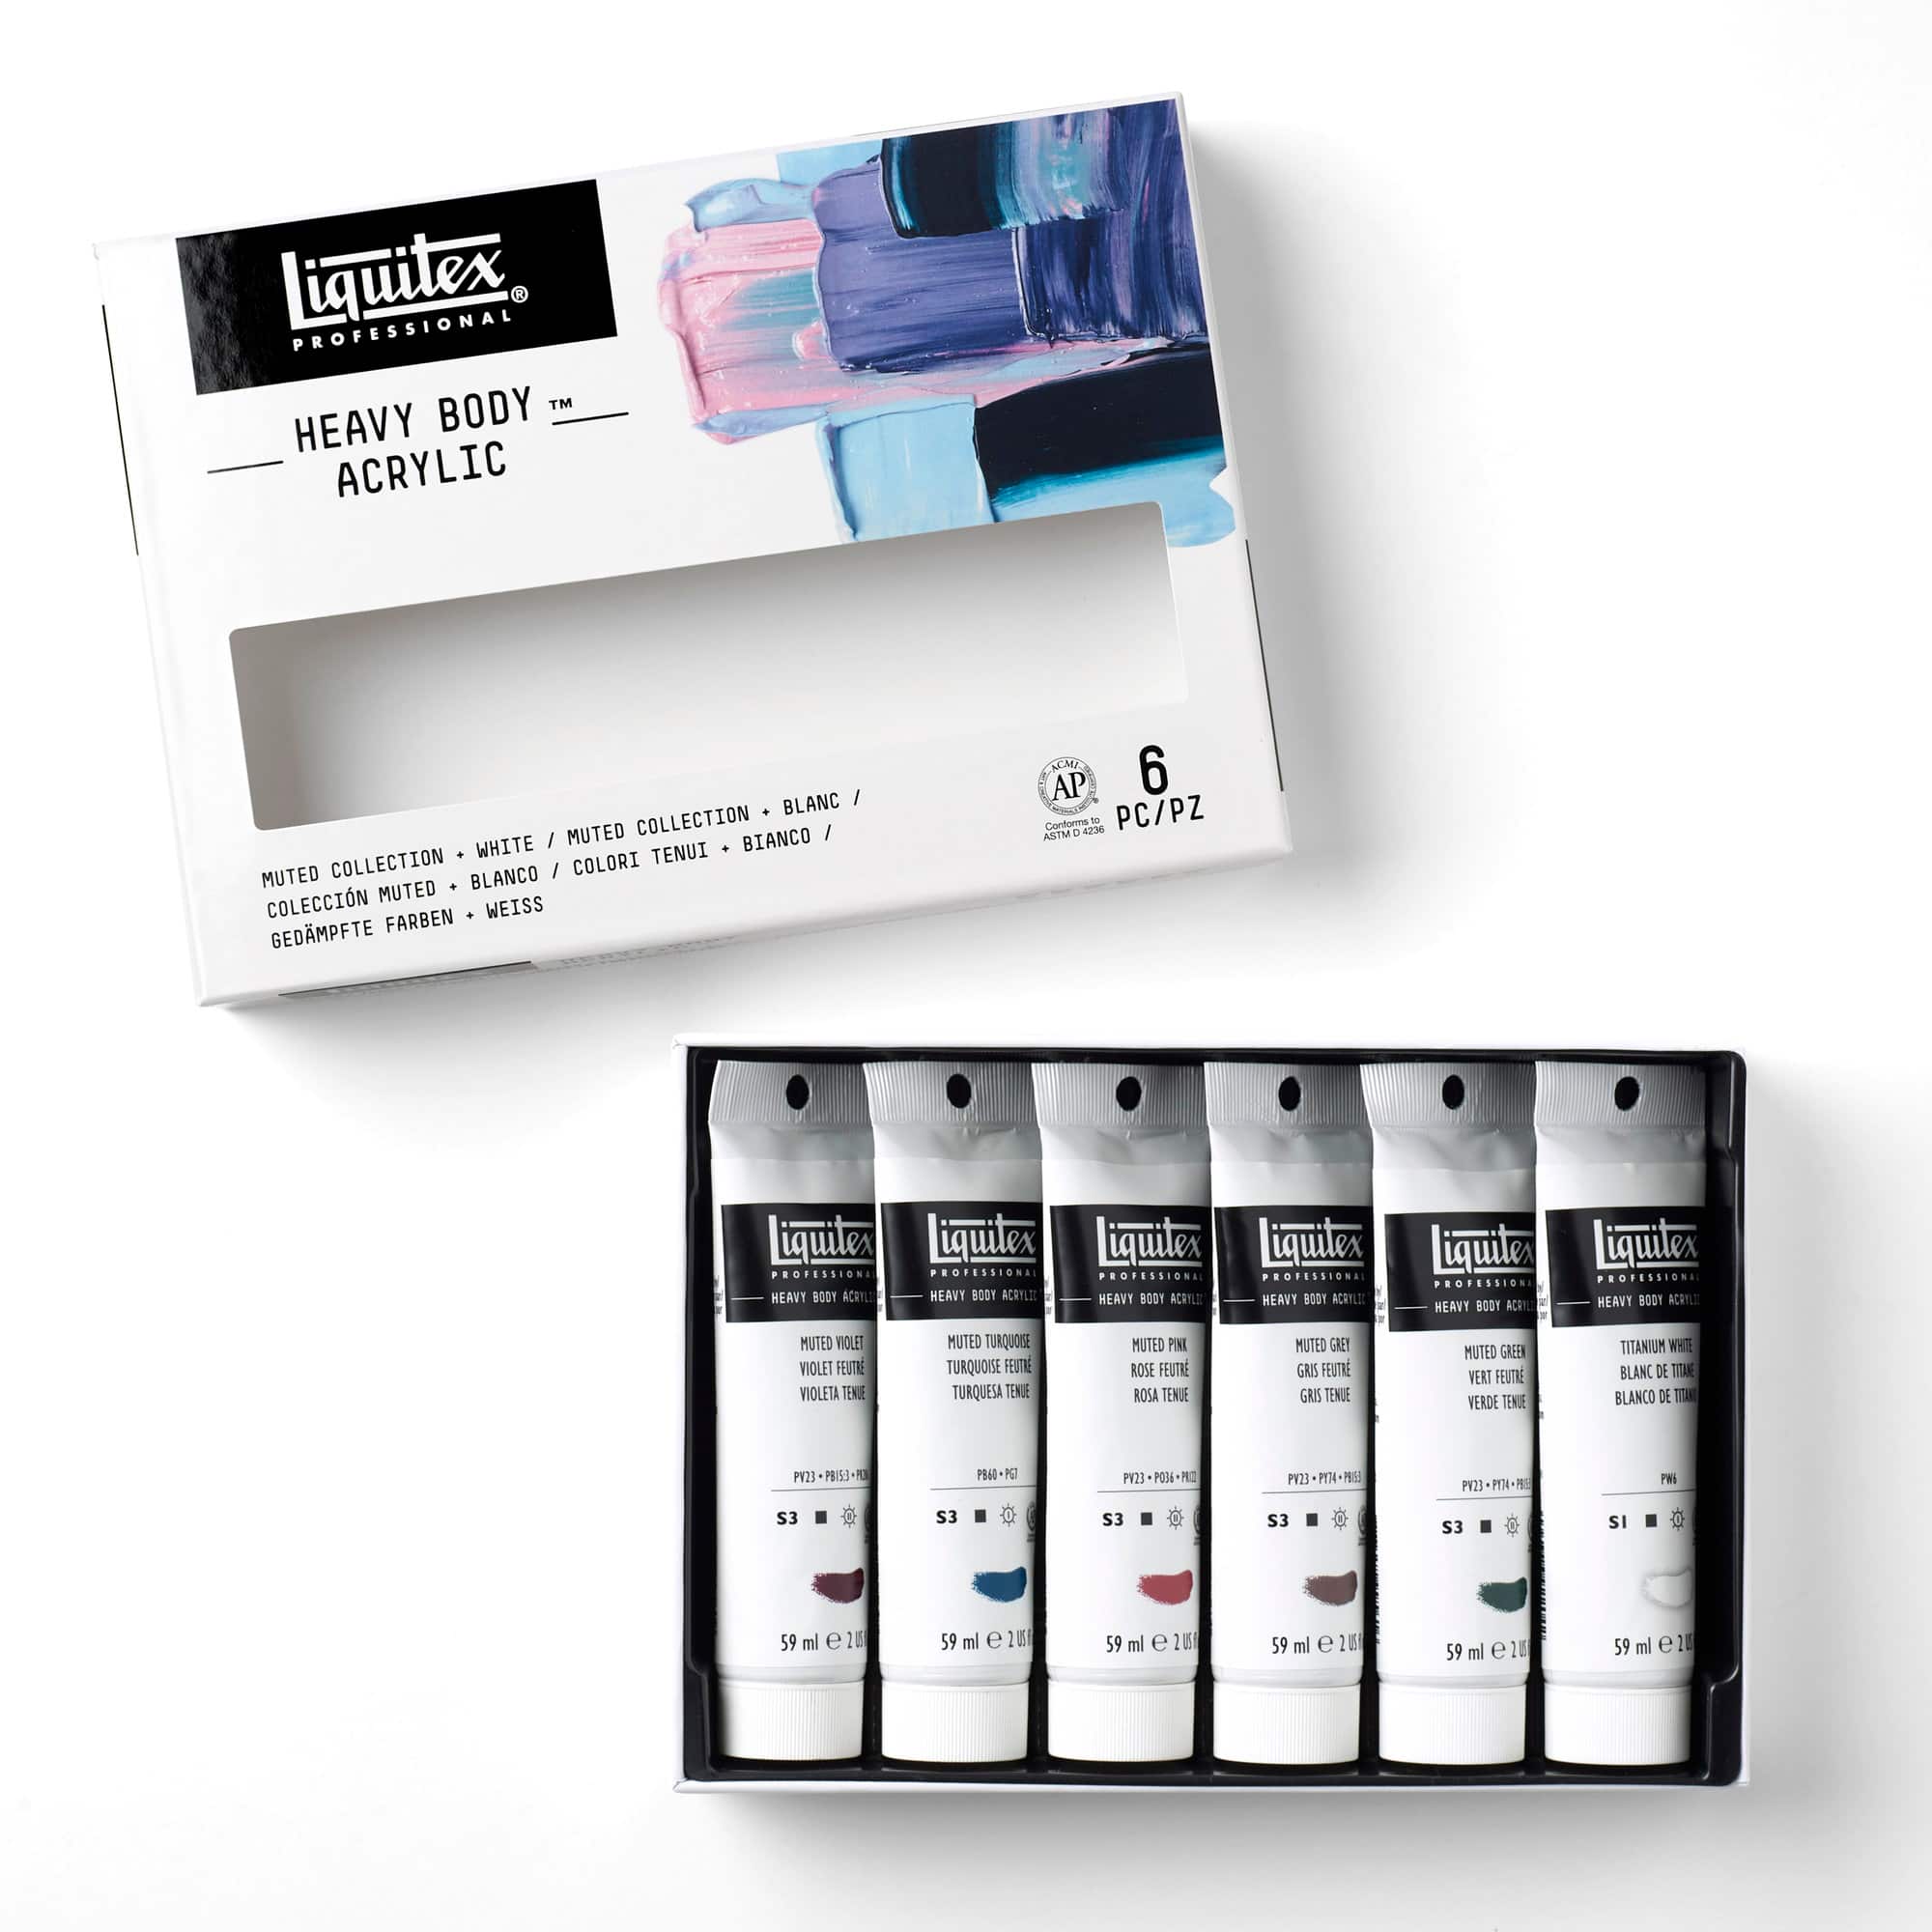 Liquitex&#xAE; Heavy Body Acrylic&#x2122;, Muted Collection + White